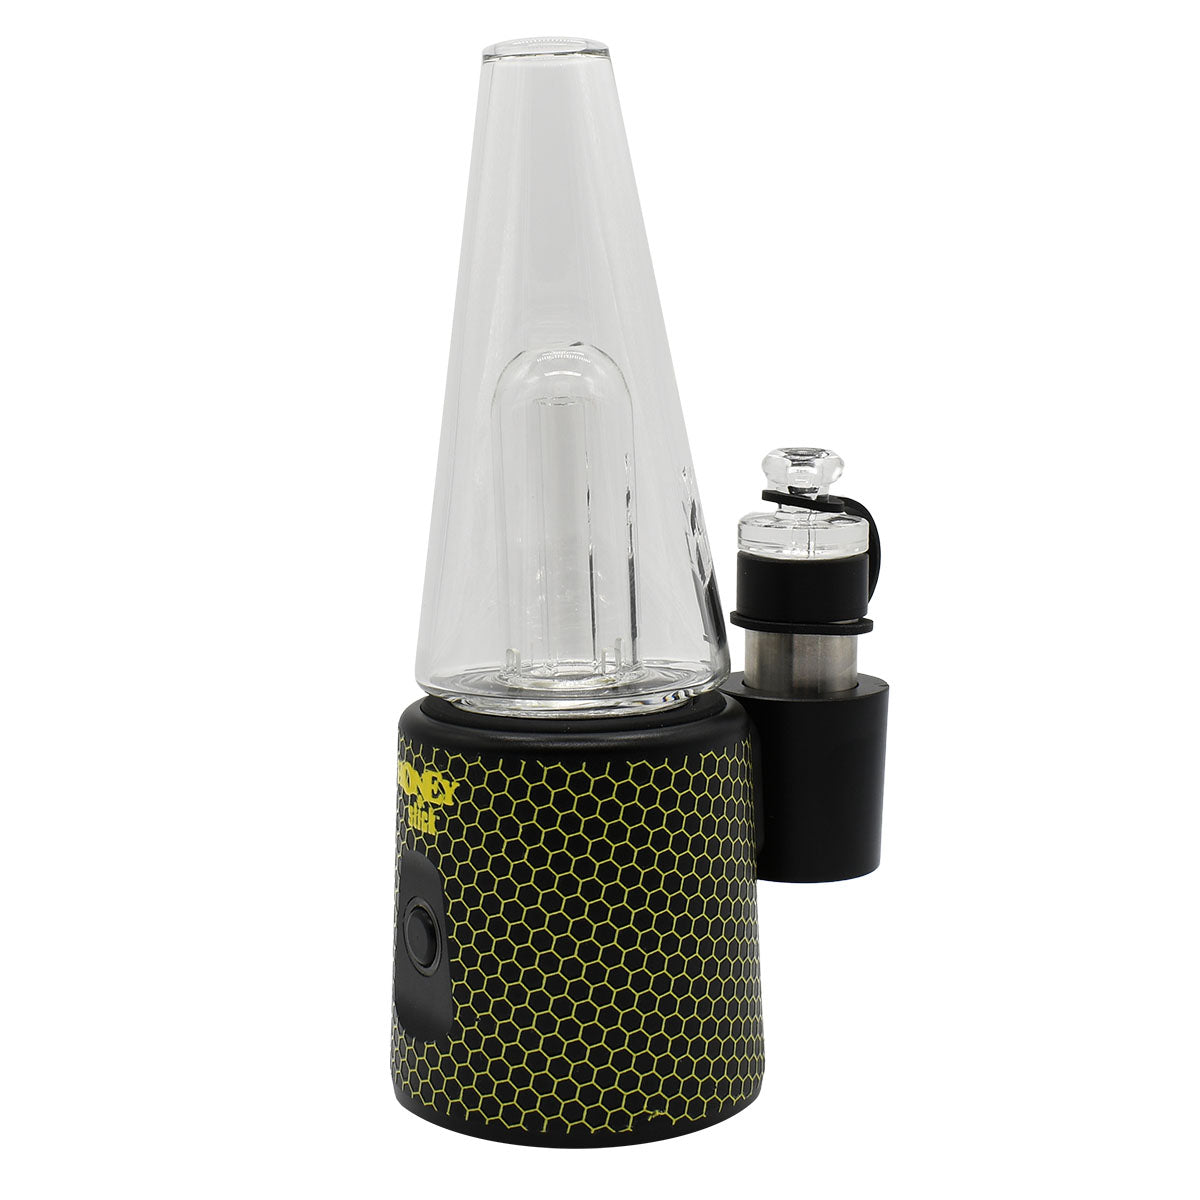 HoneyStick E Rig for vaping dabs concentrates and dry herbs